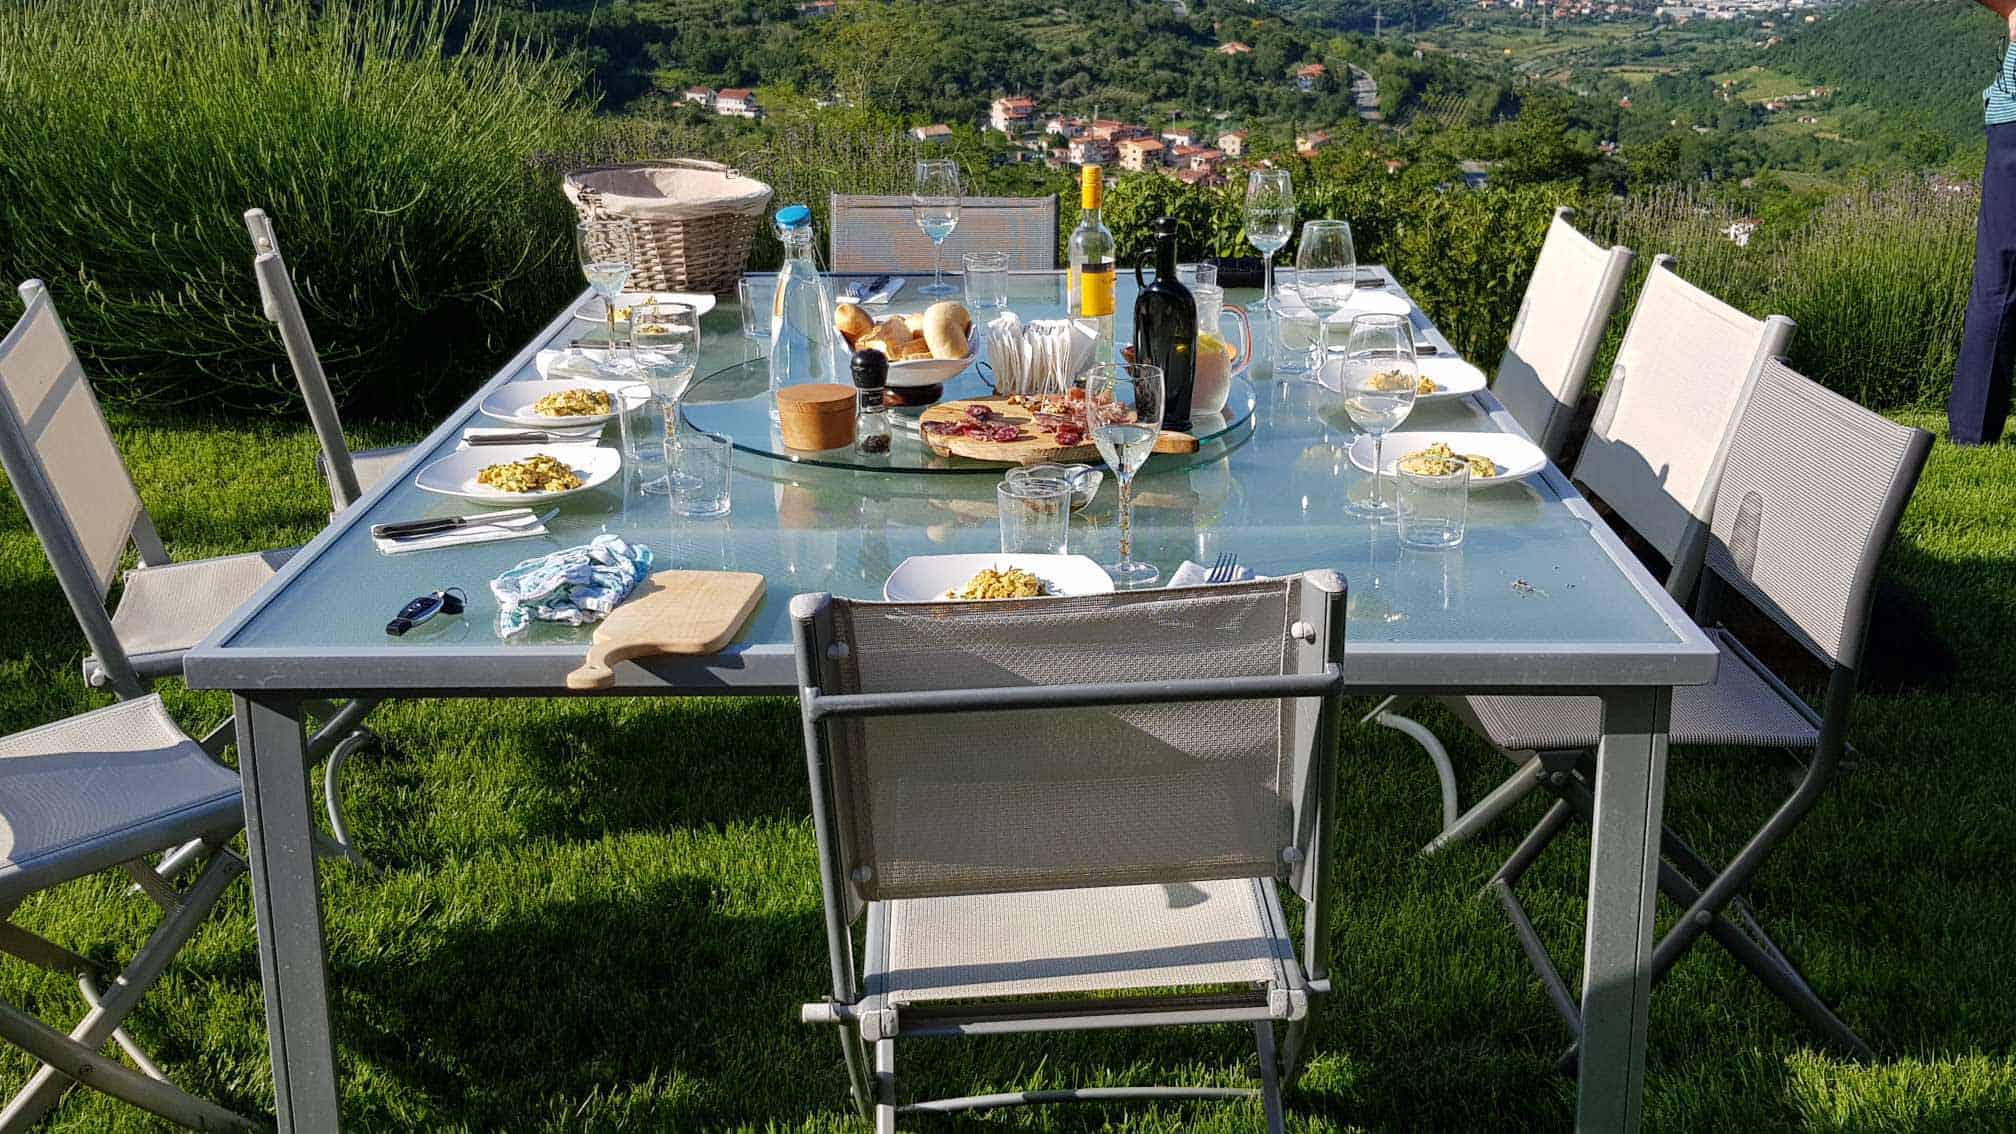 A meal in the green lush nature of Slovenia